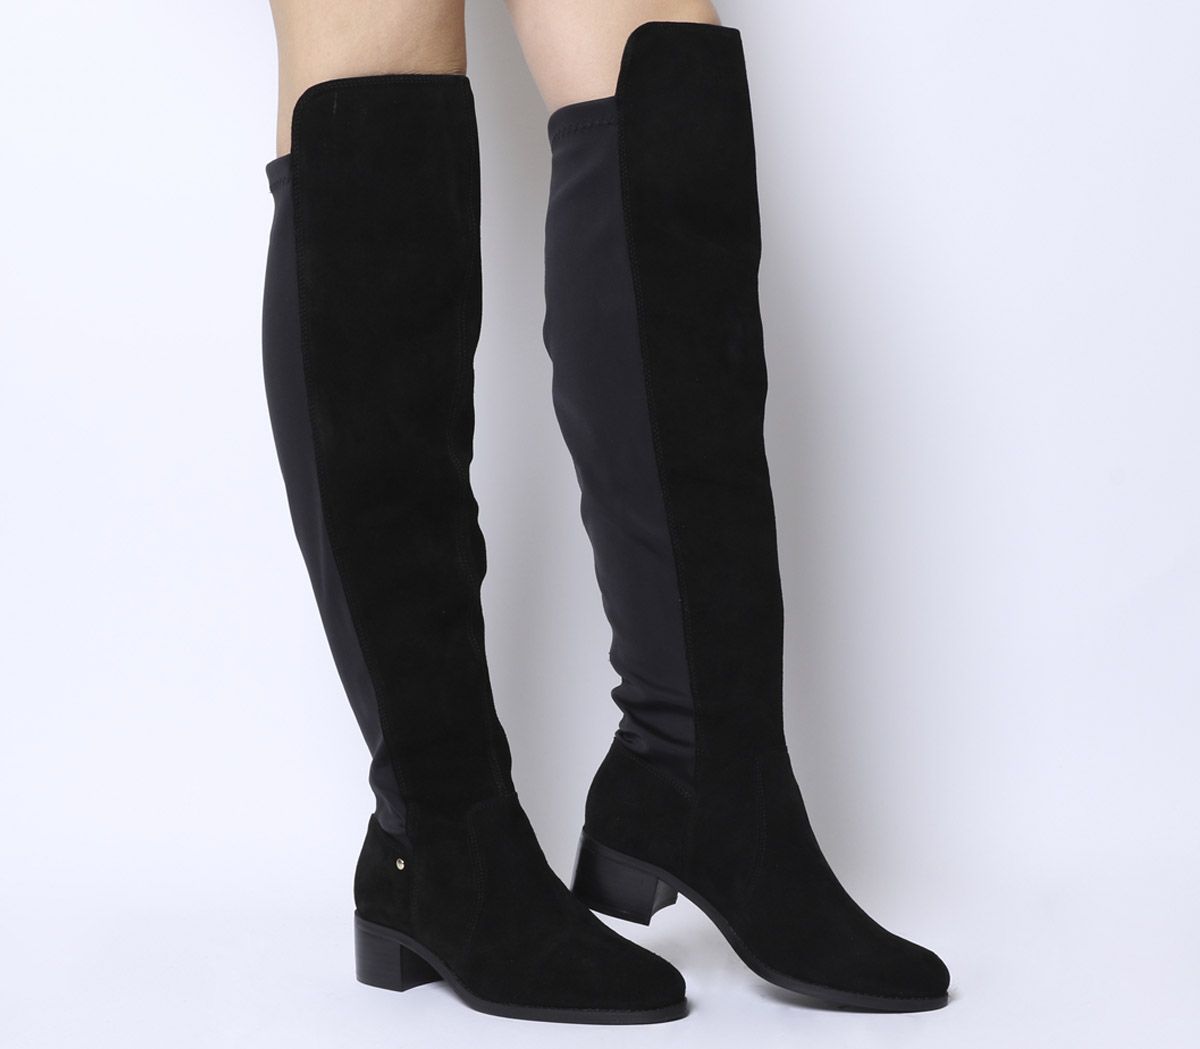 Office Kite Stretch Back Over The Knee Boots Black Suede Knee High Boots